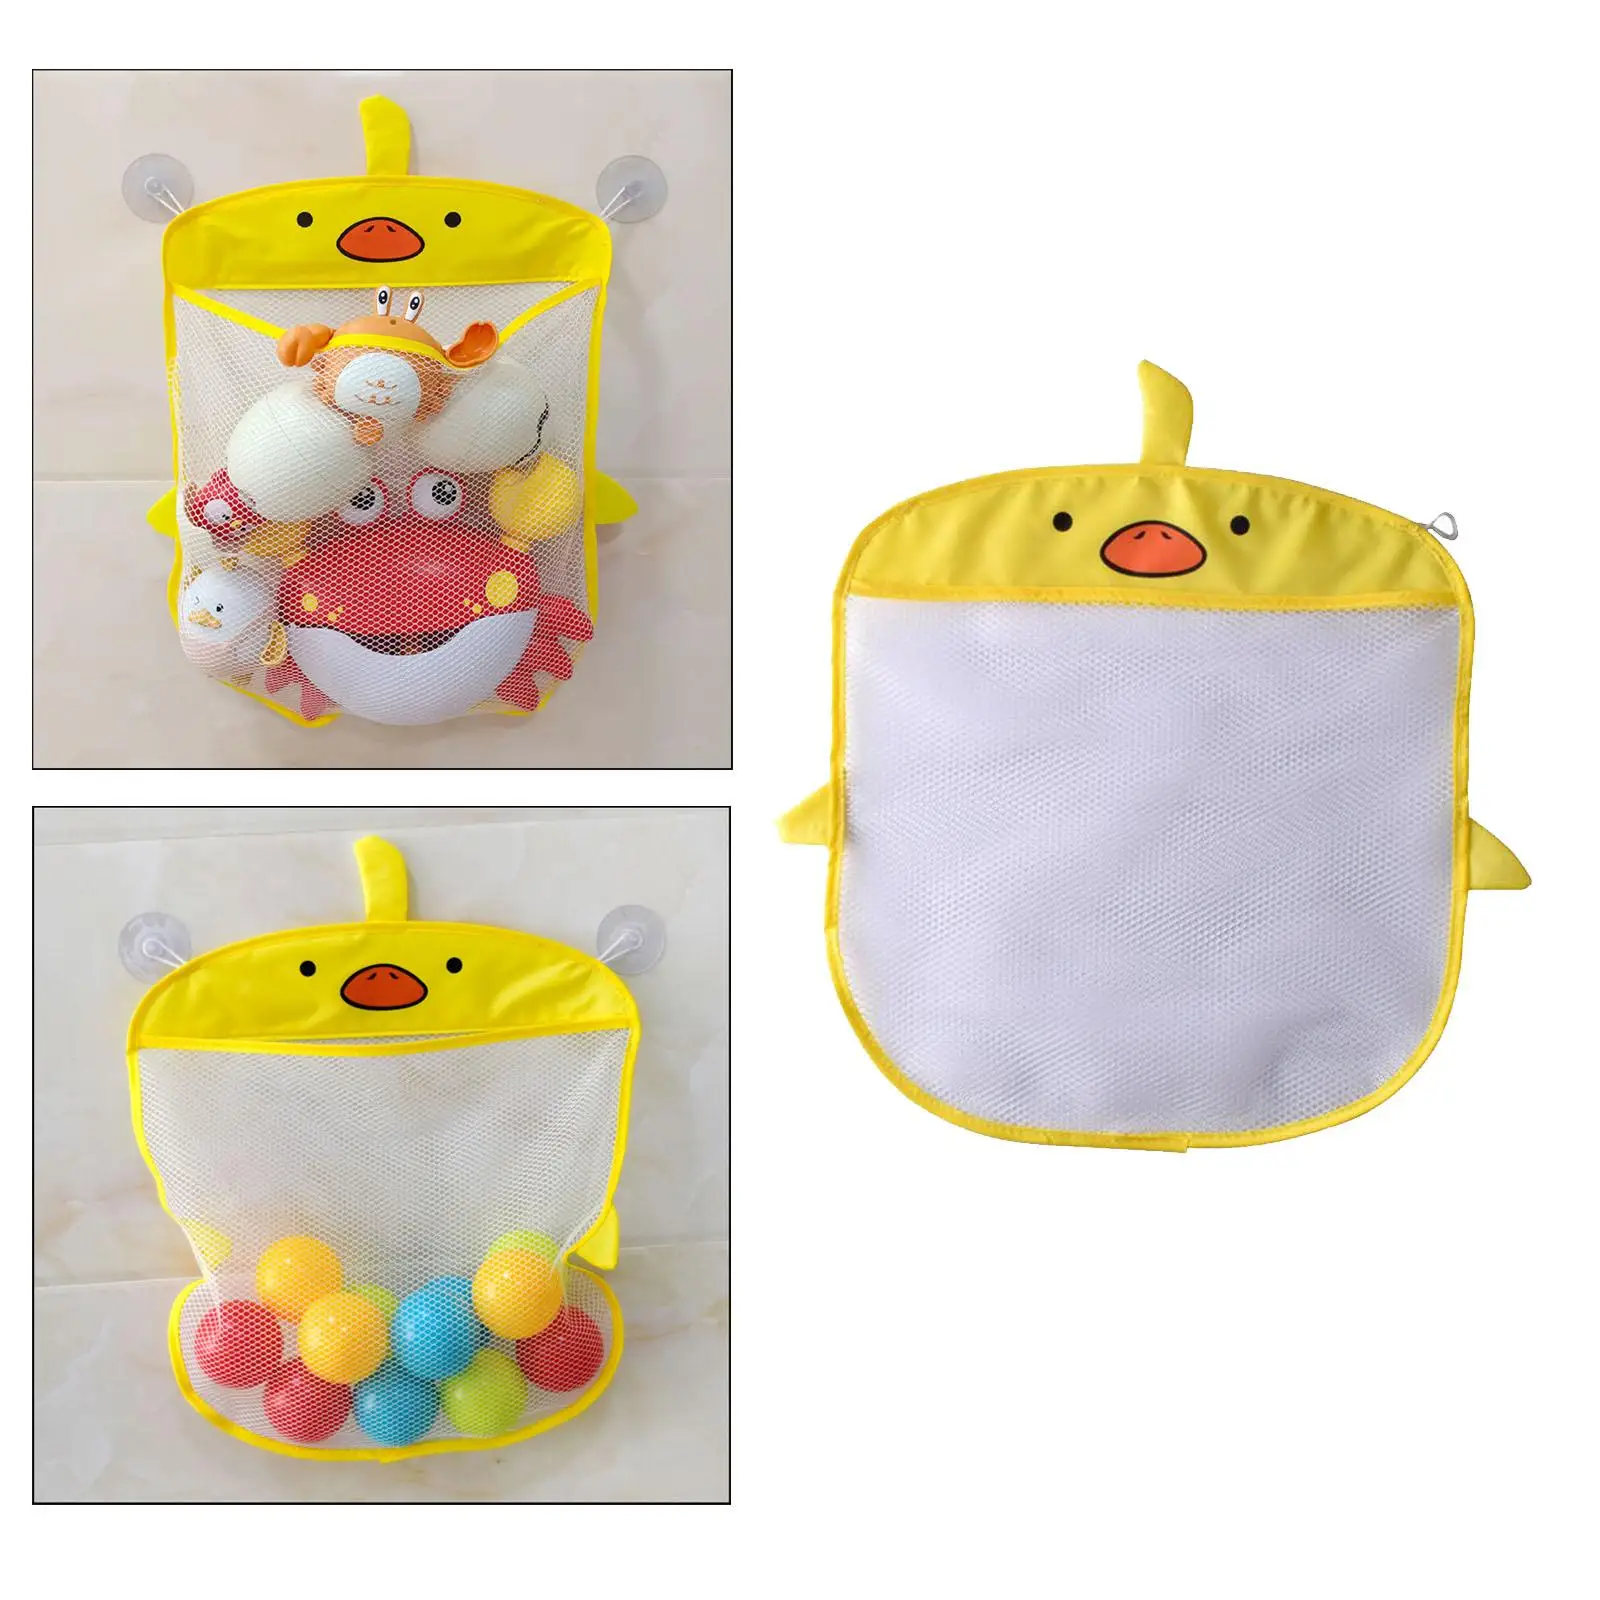 Hanging Bath Toy Storage Mesh Bag Mesh Beach Bag with Suction Cups Quick Drying Toy Organizer Mesh Bag for Toddlers Boys Girls